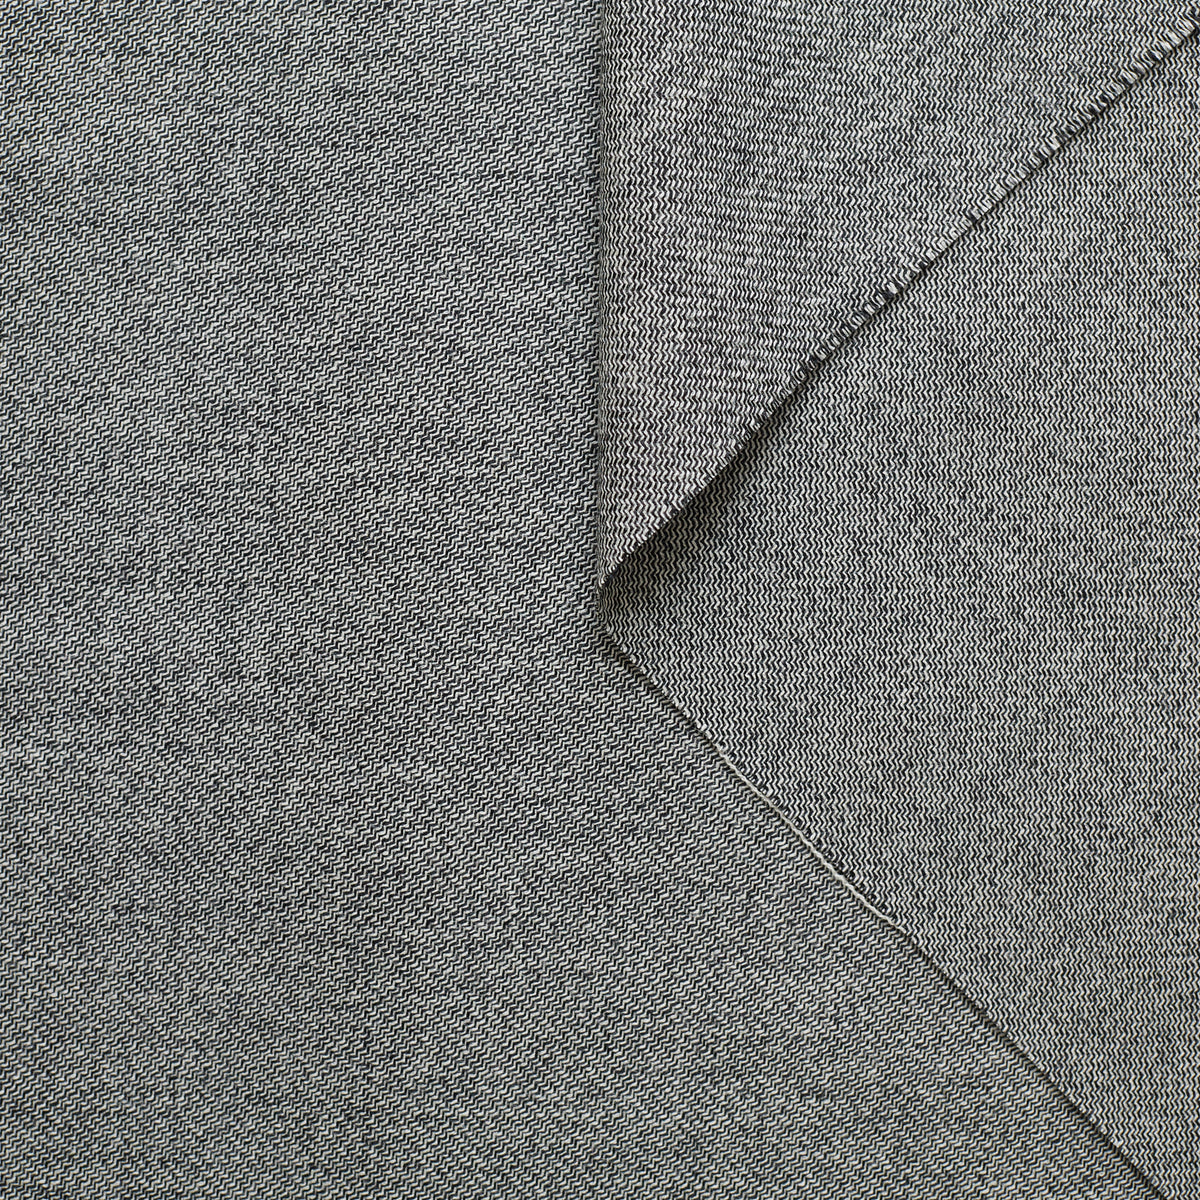 T21C00598 | Graphic Virgin Wool Suiting